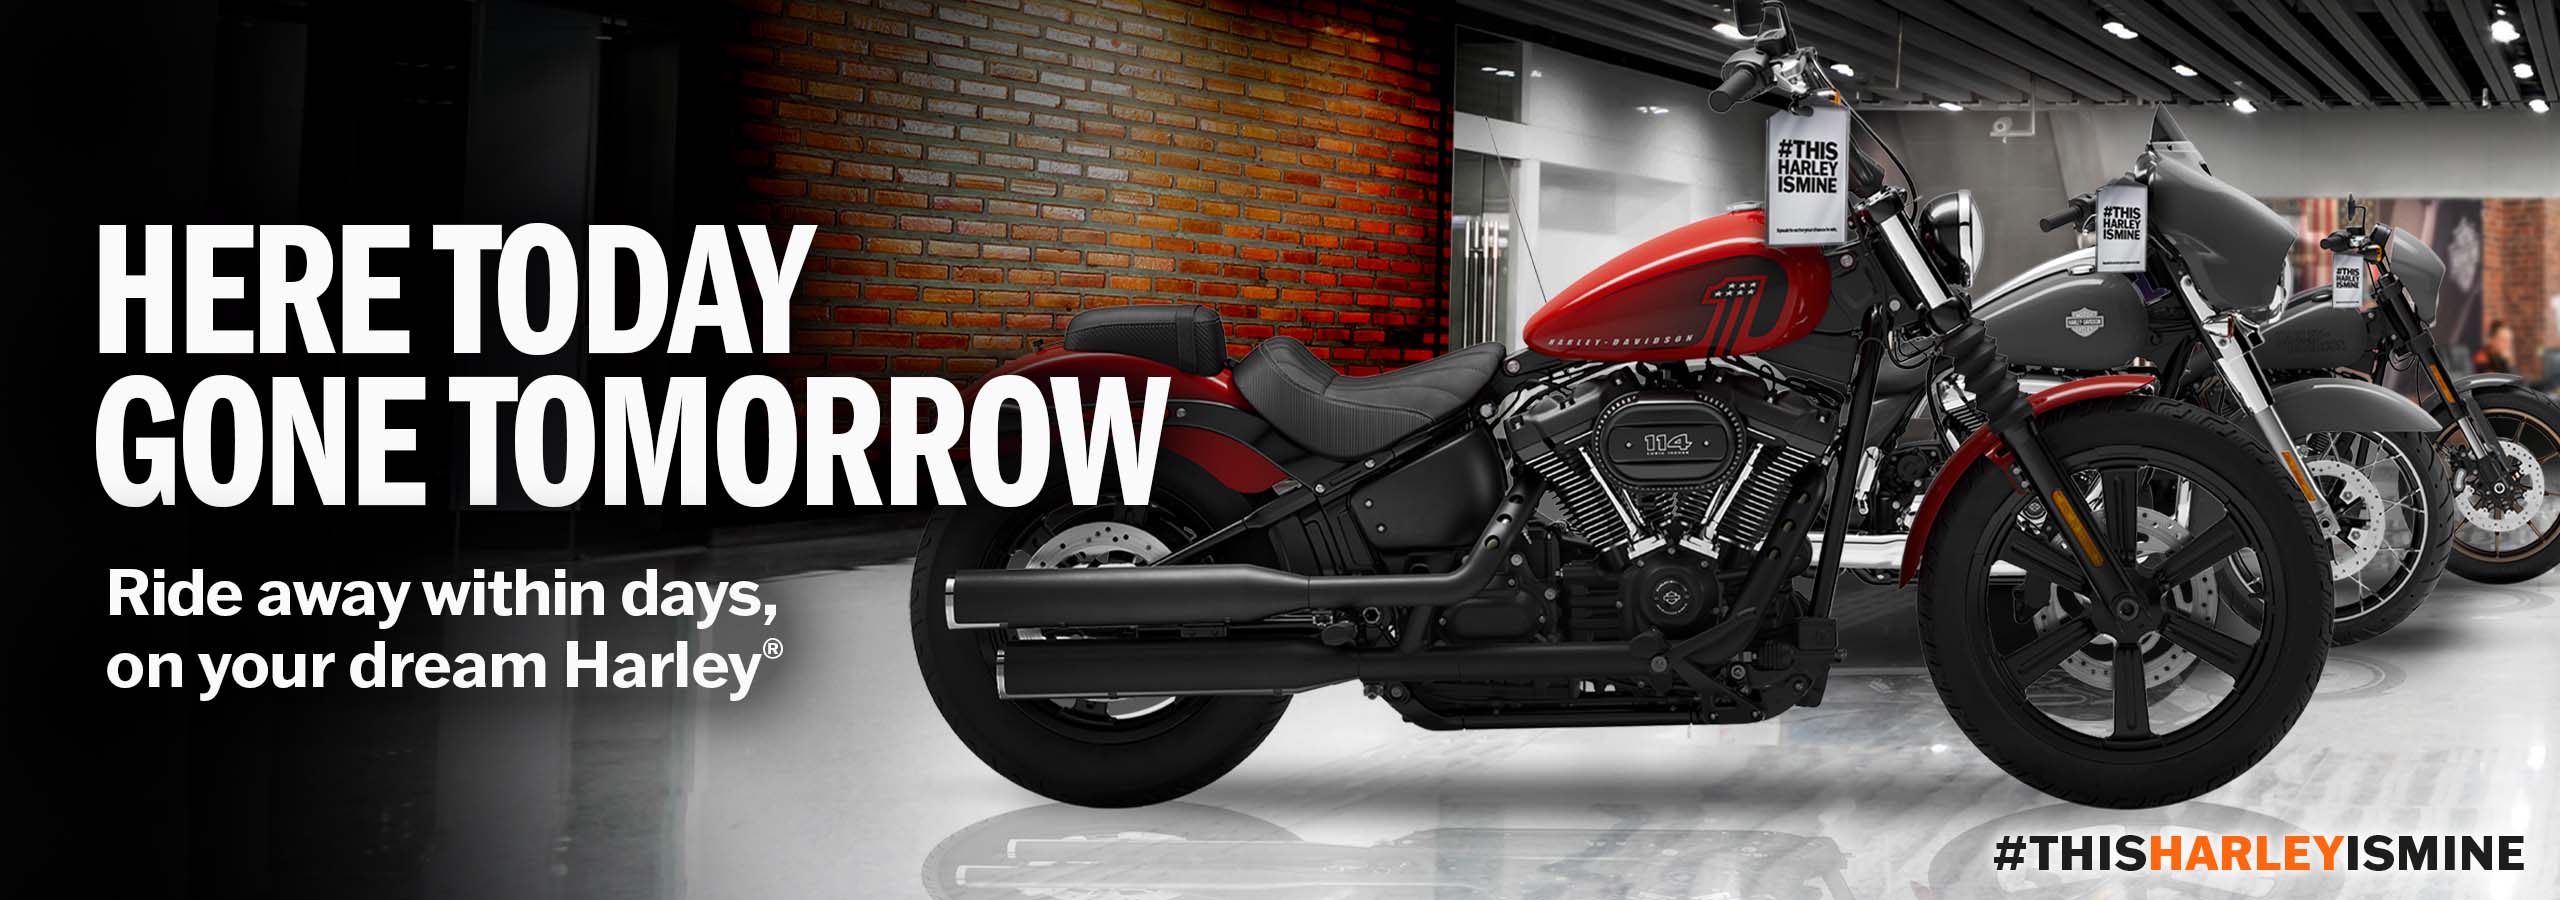 Ride away on your dream Harley within days!